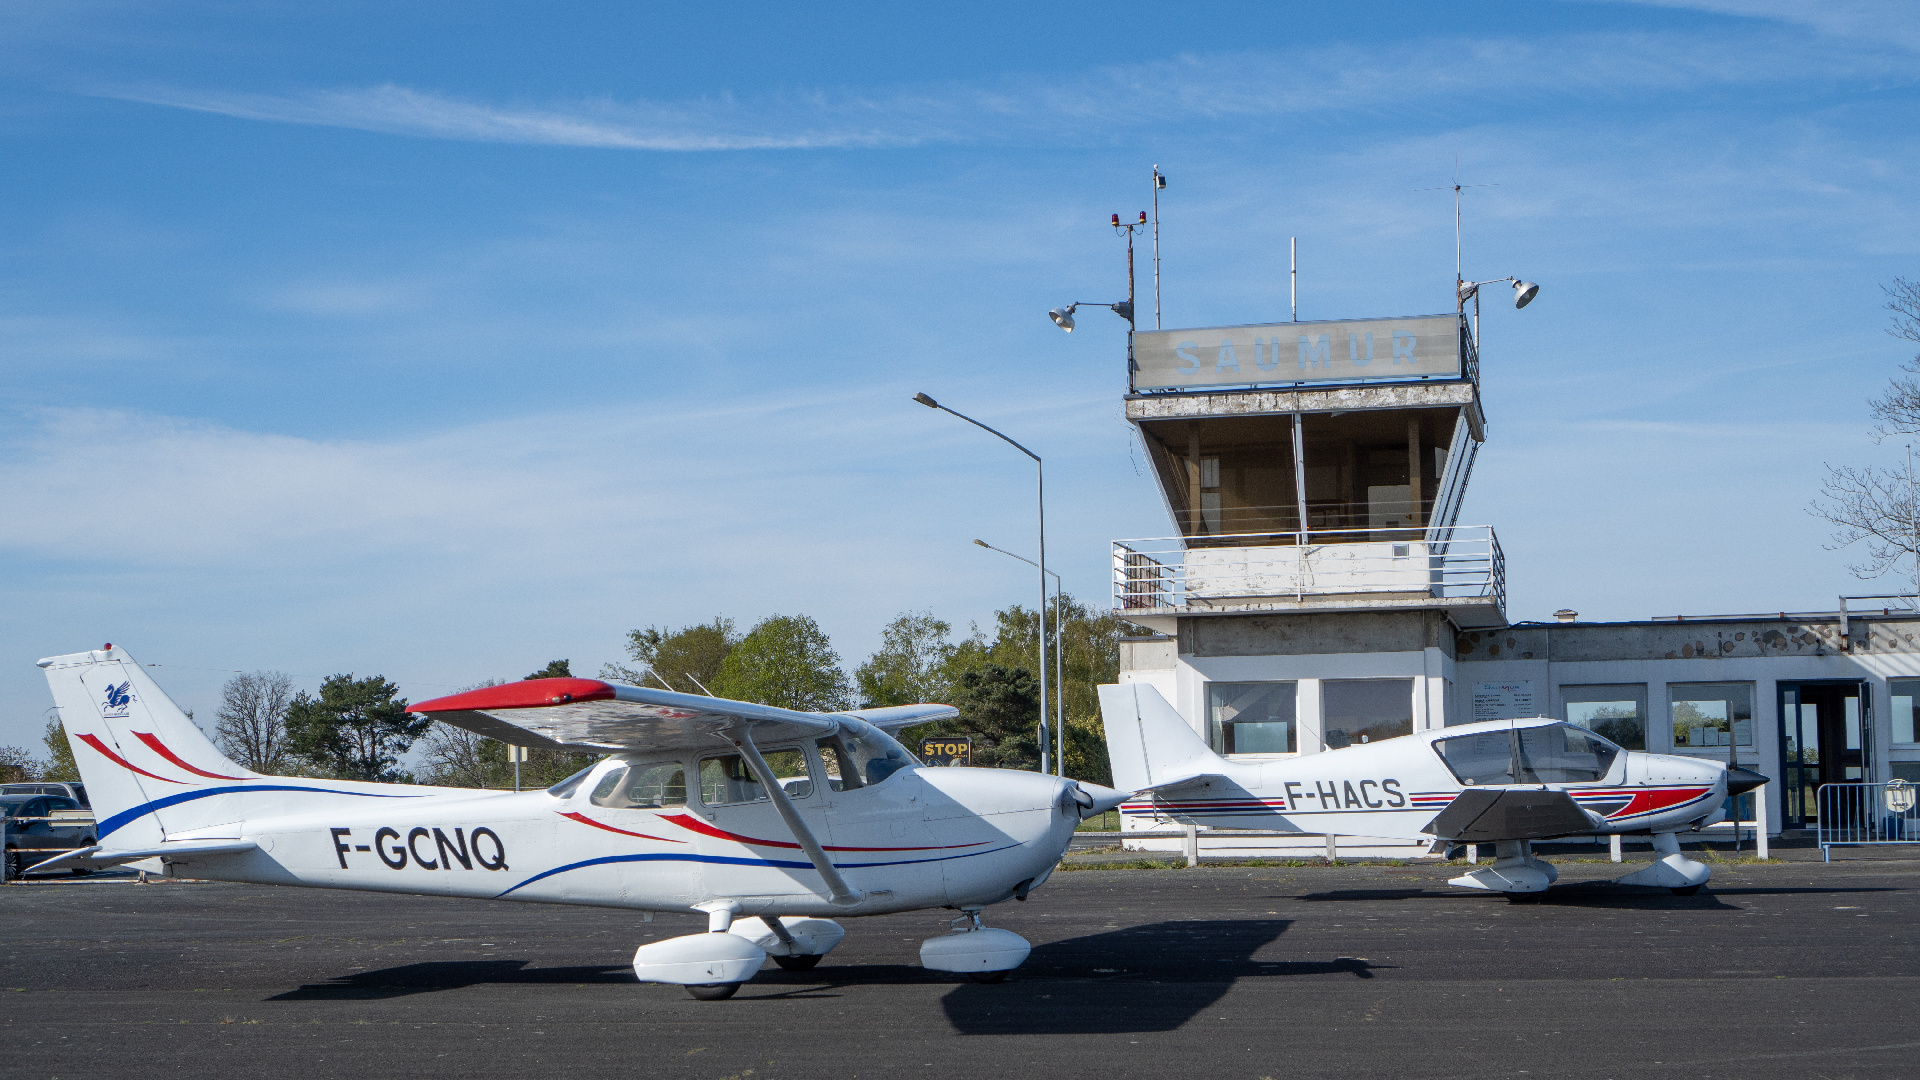 Saumur Air Club planes in front of control tower